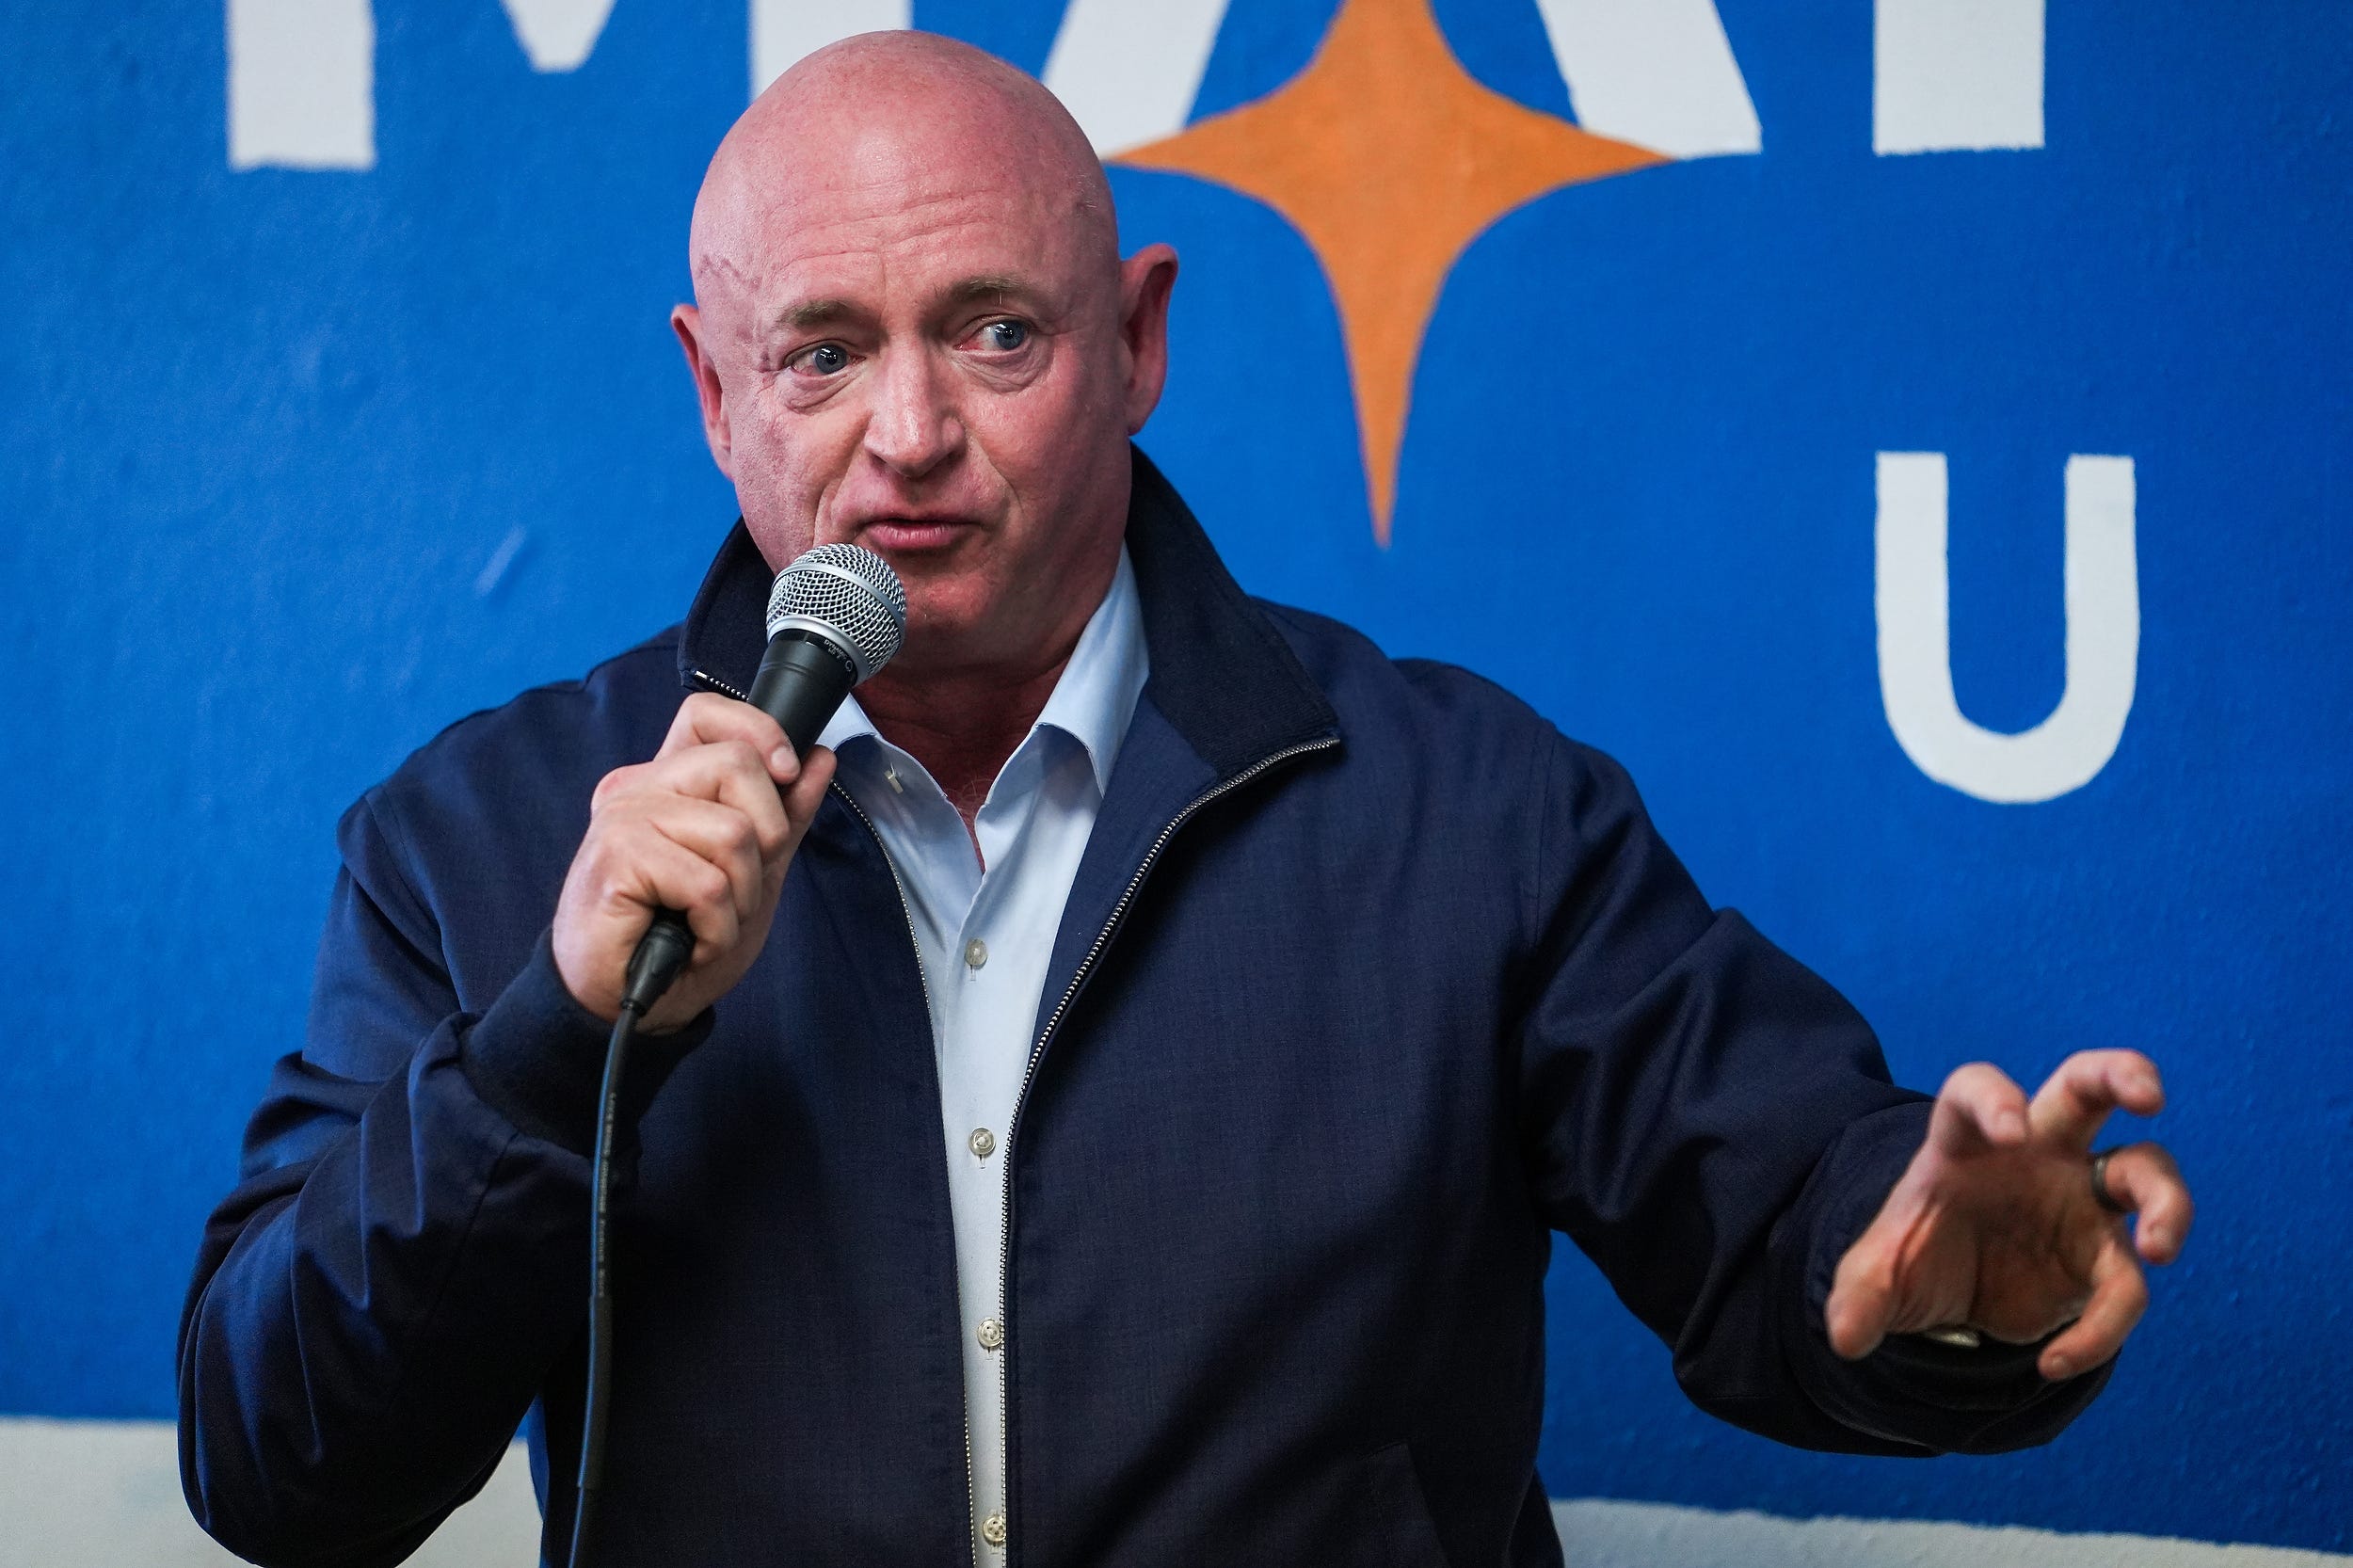 Sen. Mark Kelly speaks during an opening event for the first Mission for Arizona Coordinated Campaign office in Mesa on Thursday, April 14, 2022.